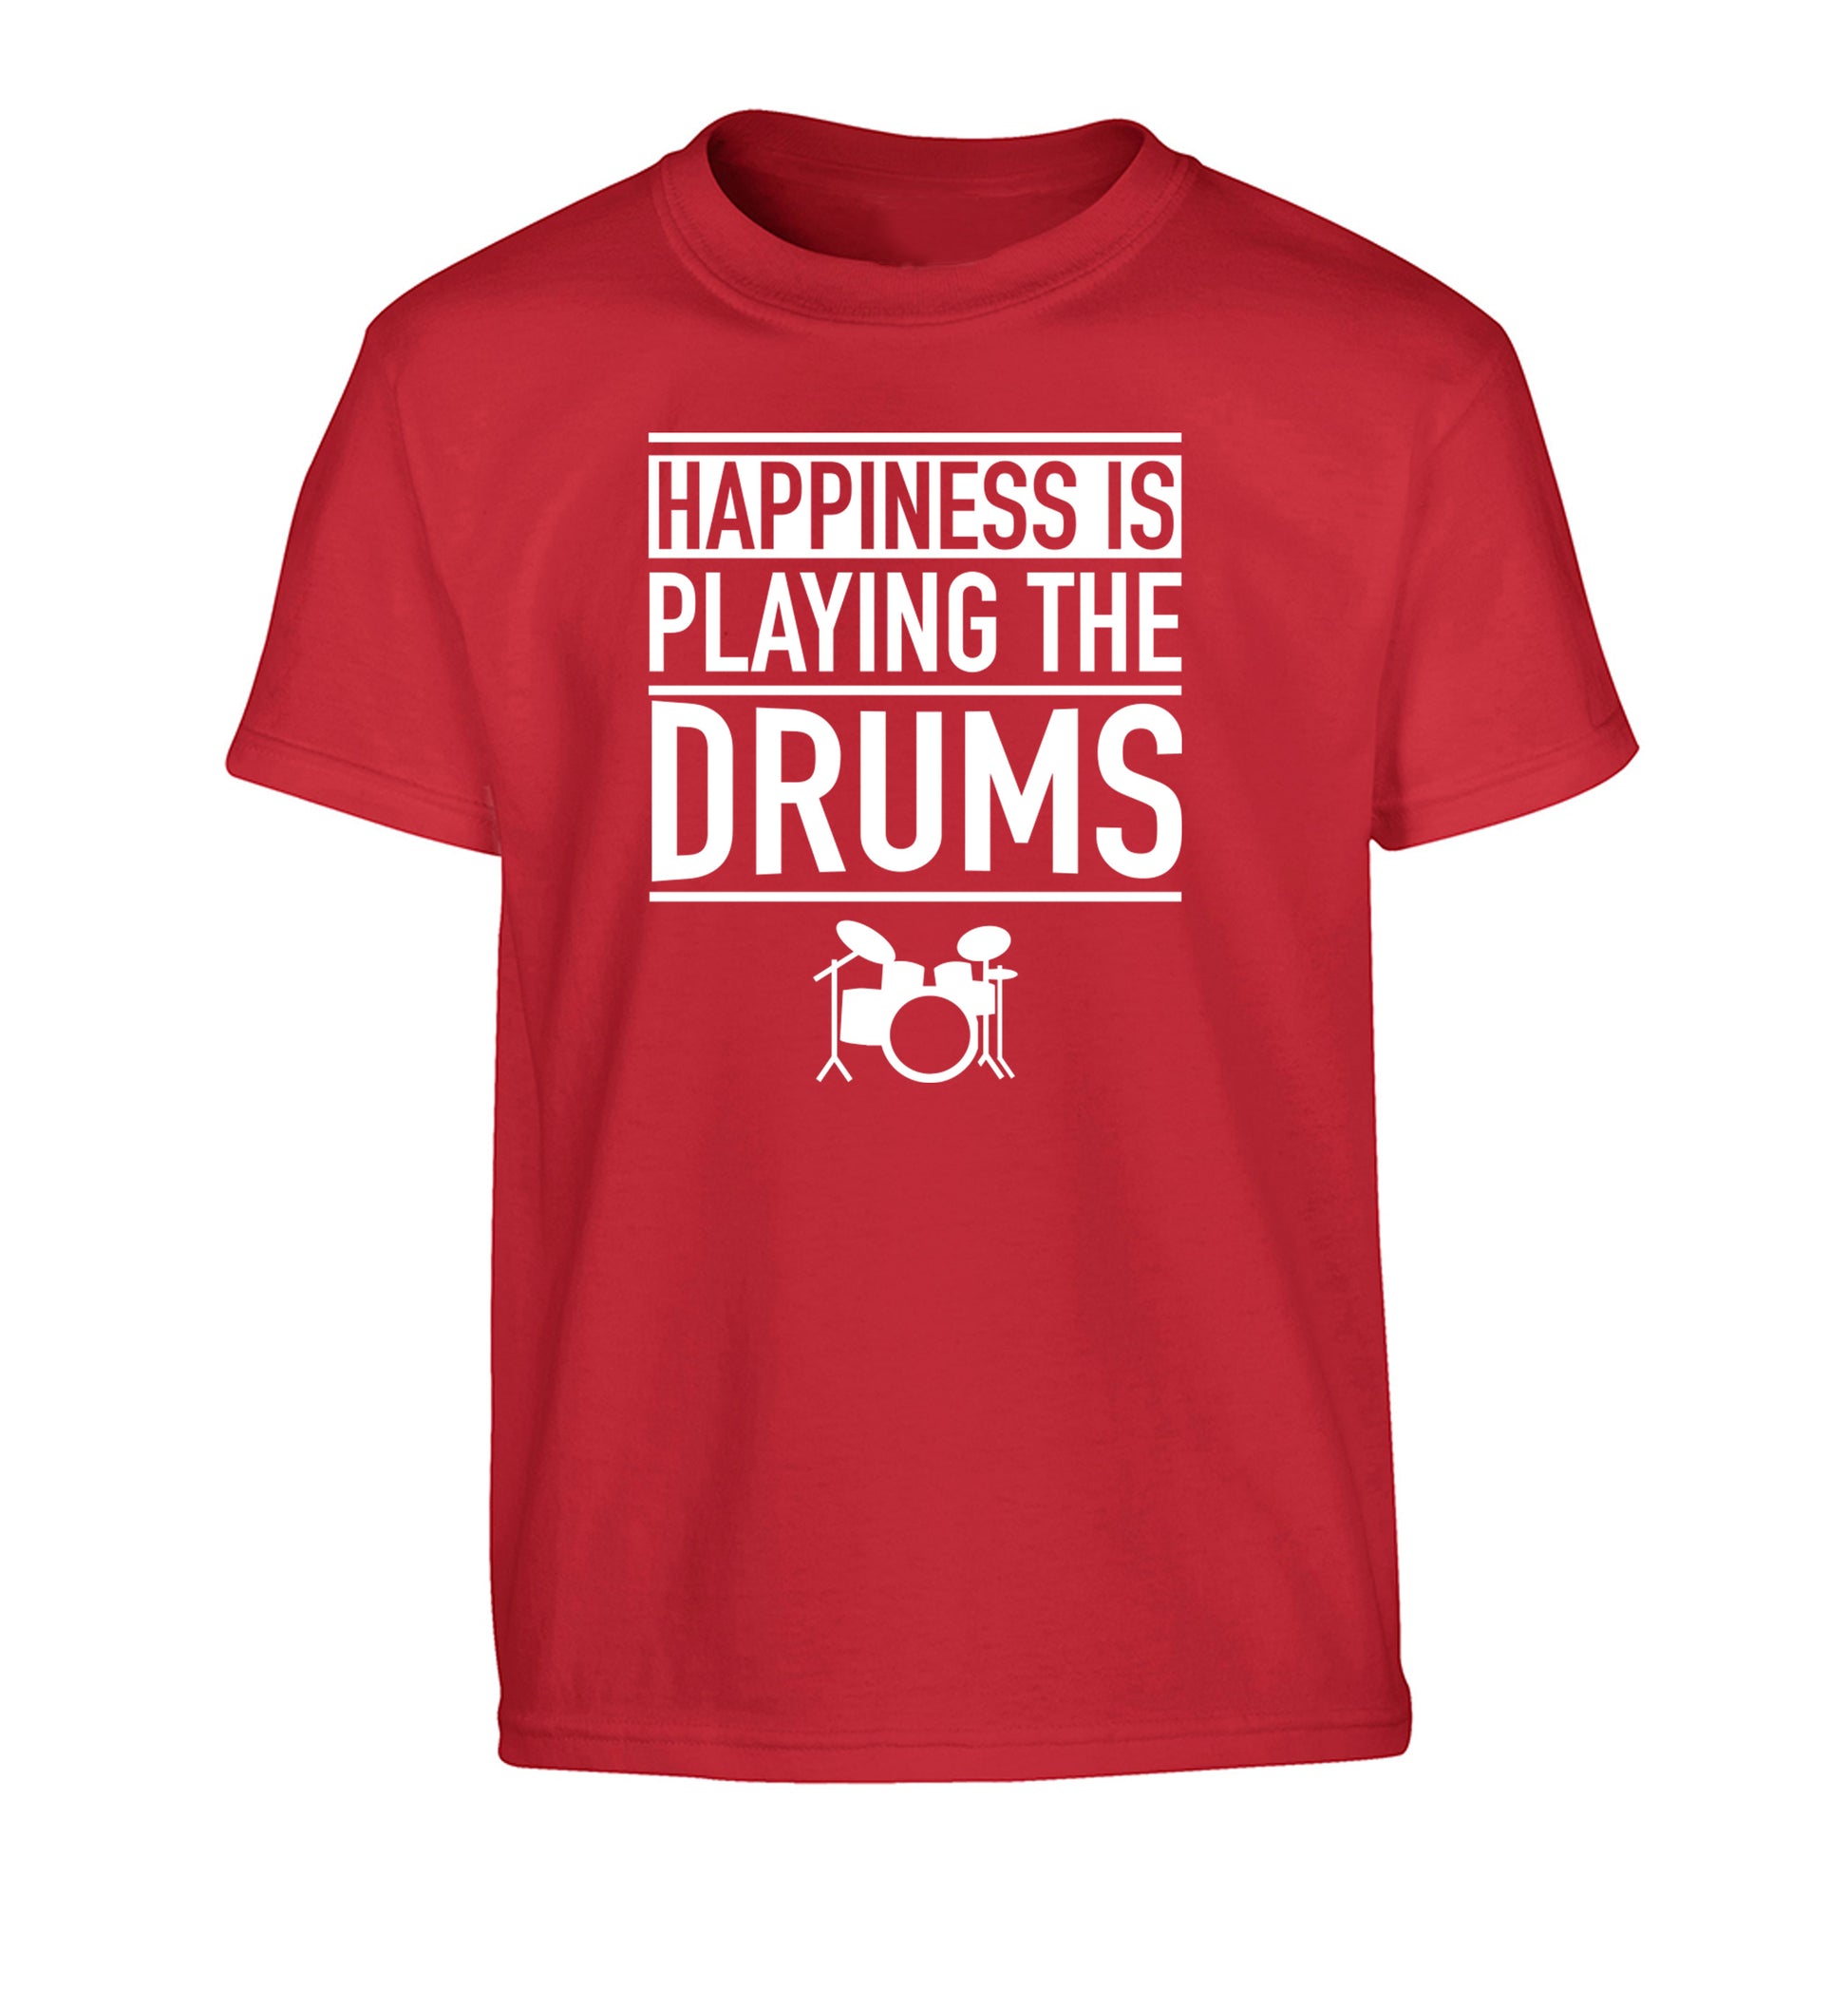 Happiness is playing the drums Children's red Tshirt 12-14 Years